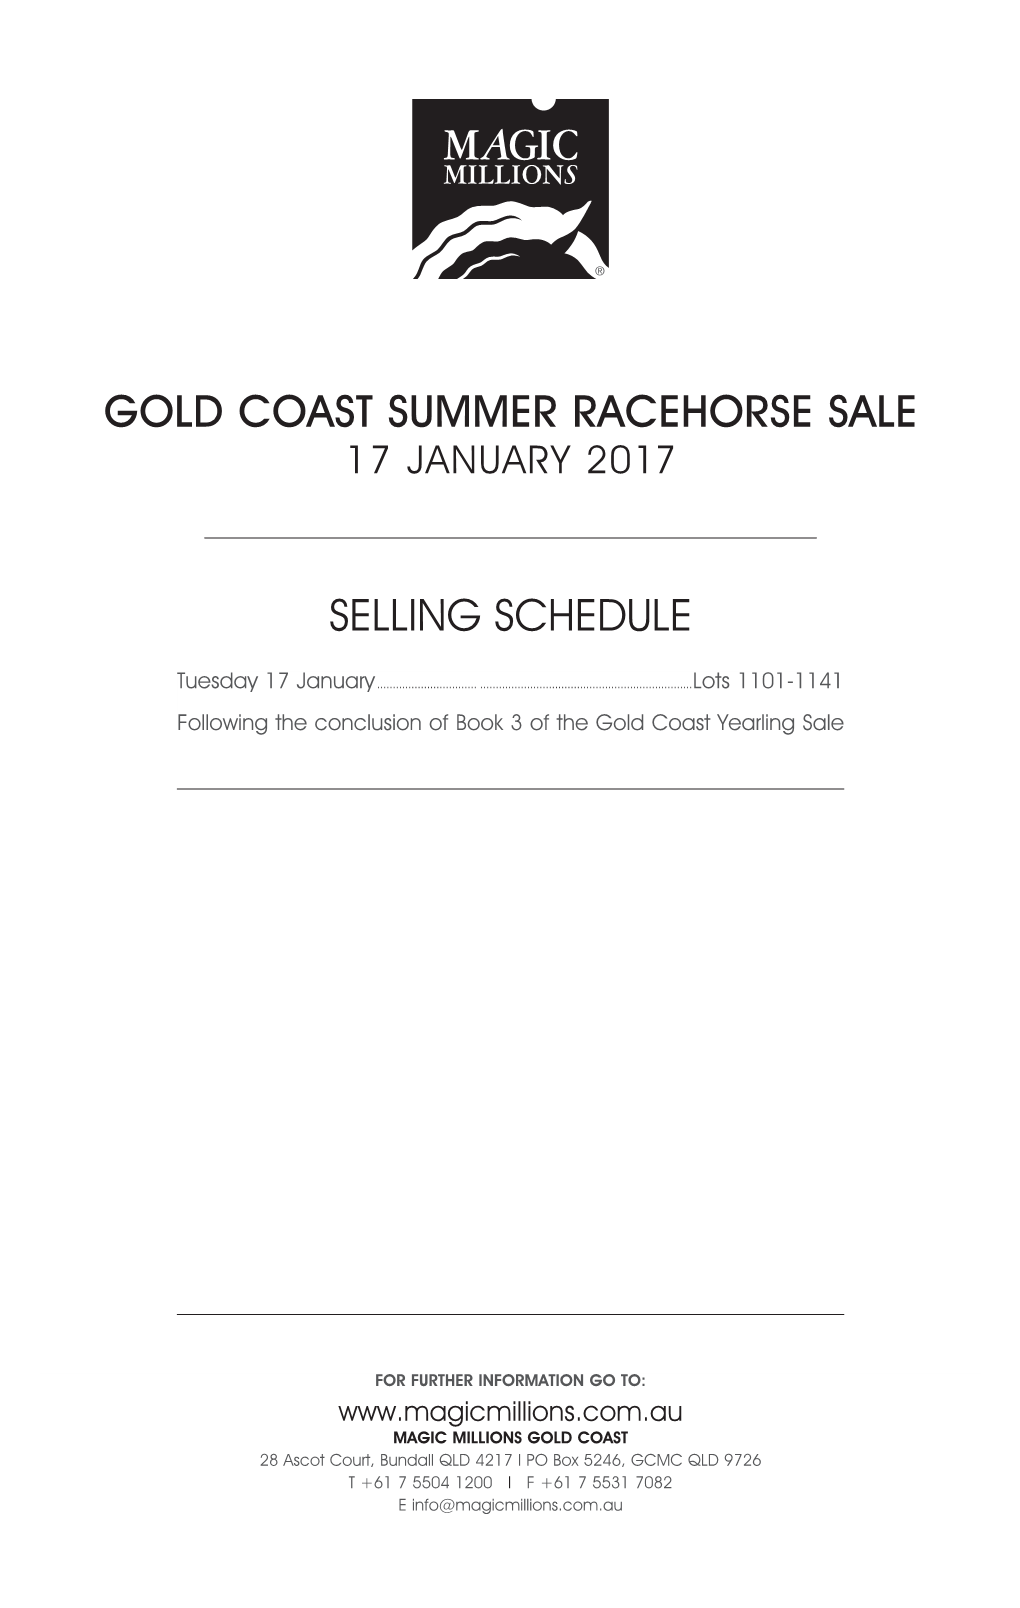 Gold Coast Summer Racehorse Sale Selling